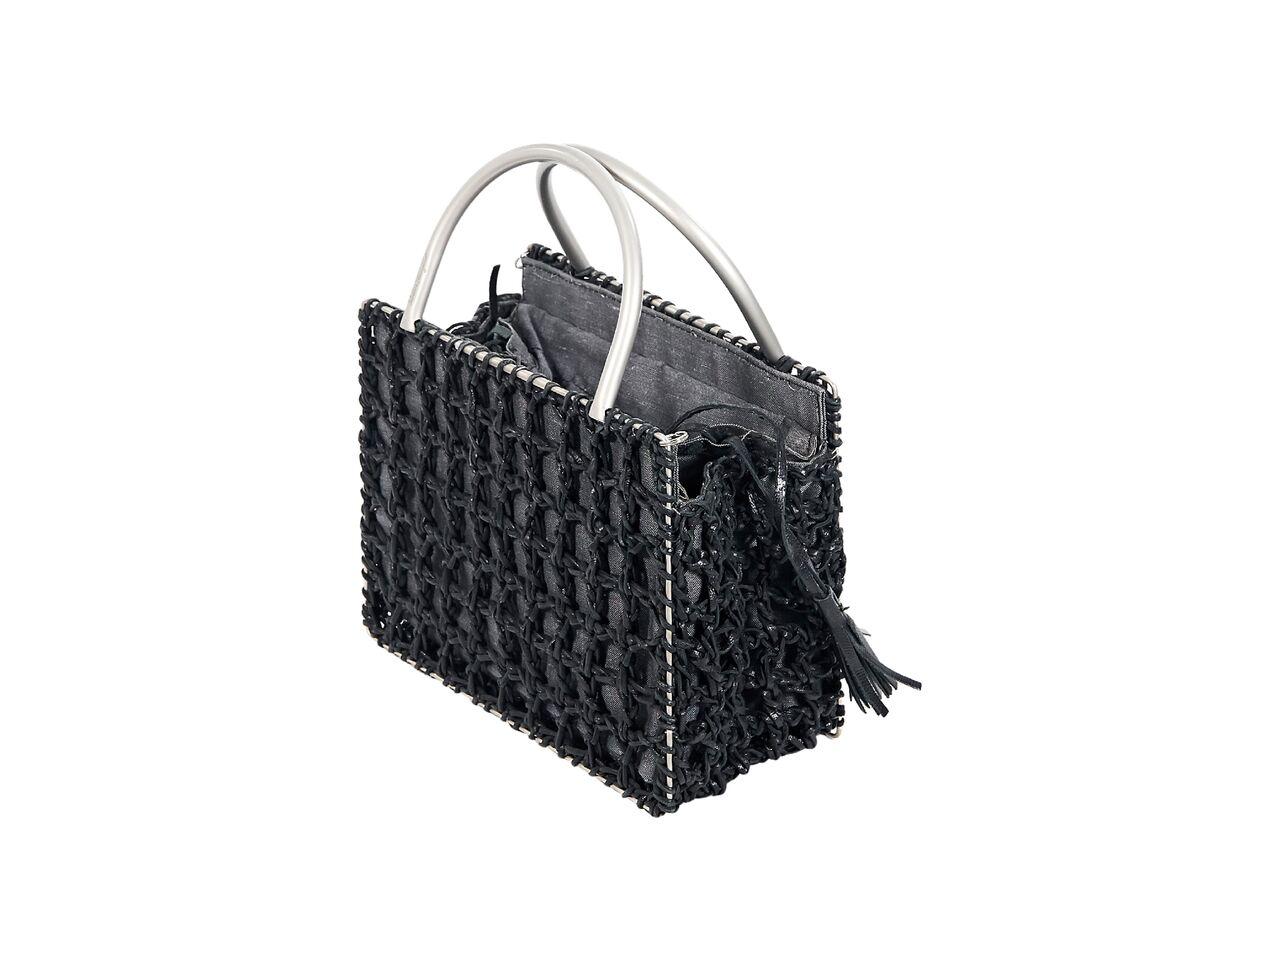 Product details:  Black twisted leather and fabric evening bag by Salvatore Ferragamo.  Dual carry handles.  Top drawstring closure.  Lined interior.  Silvertone hardware.  7